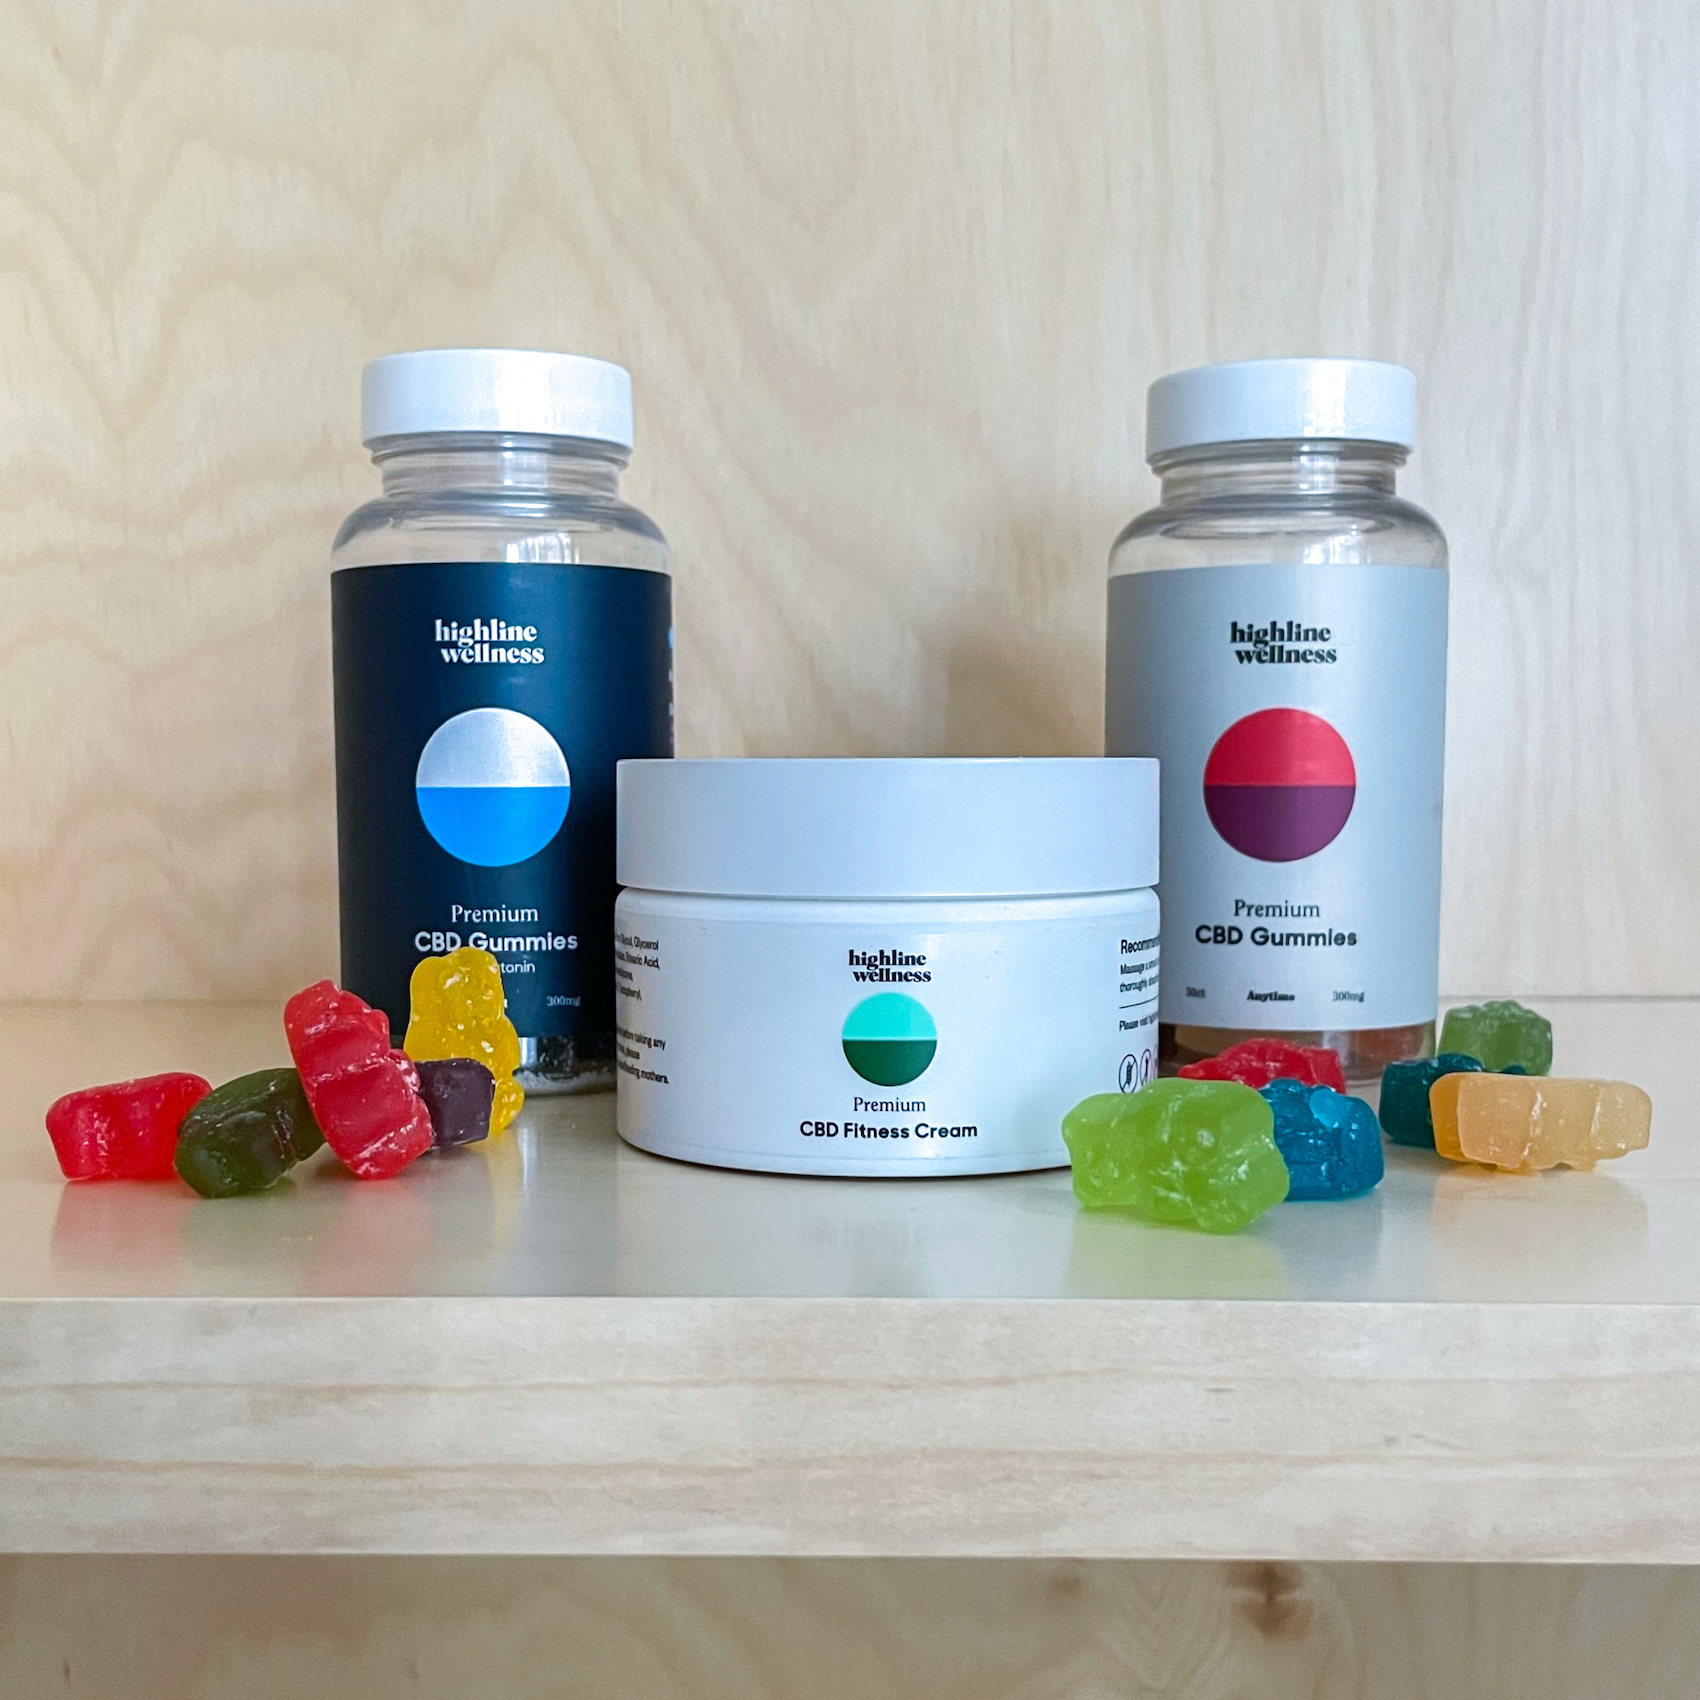 Highline Wellness CBD products review